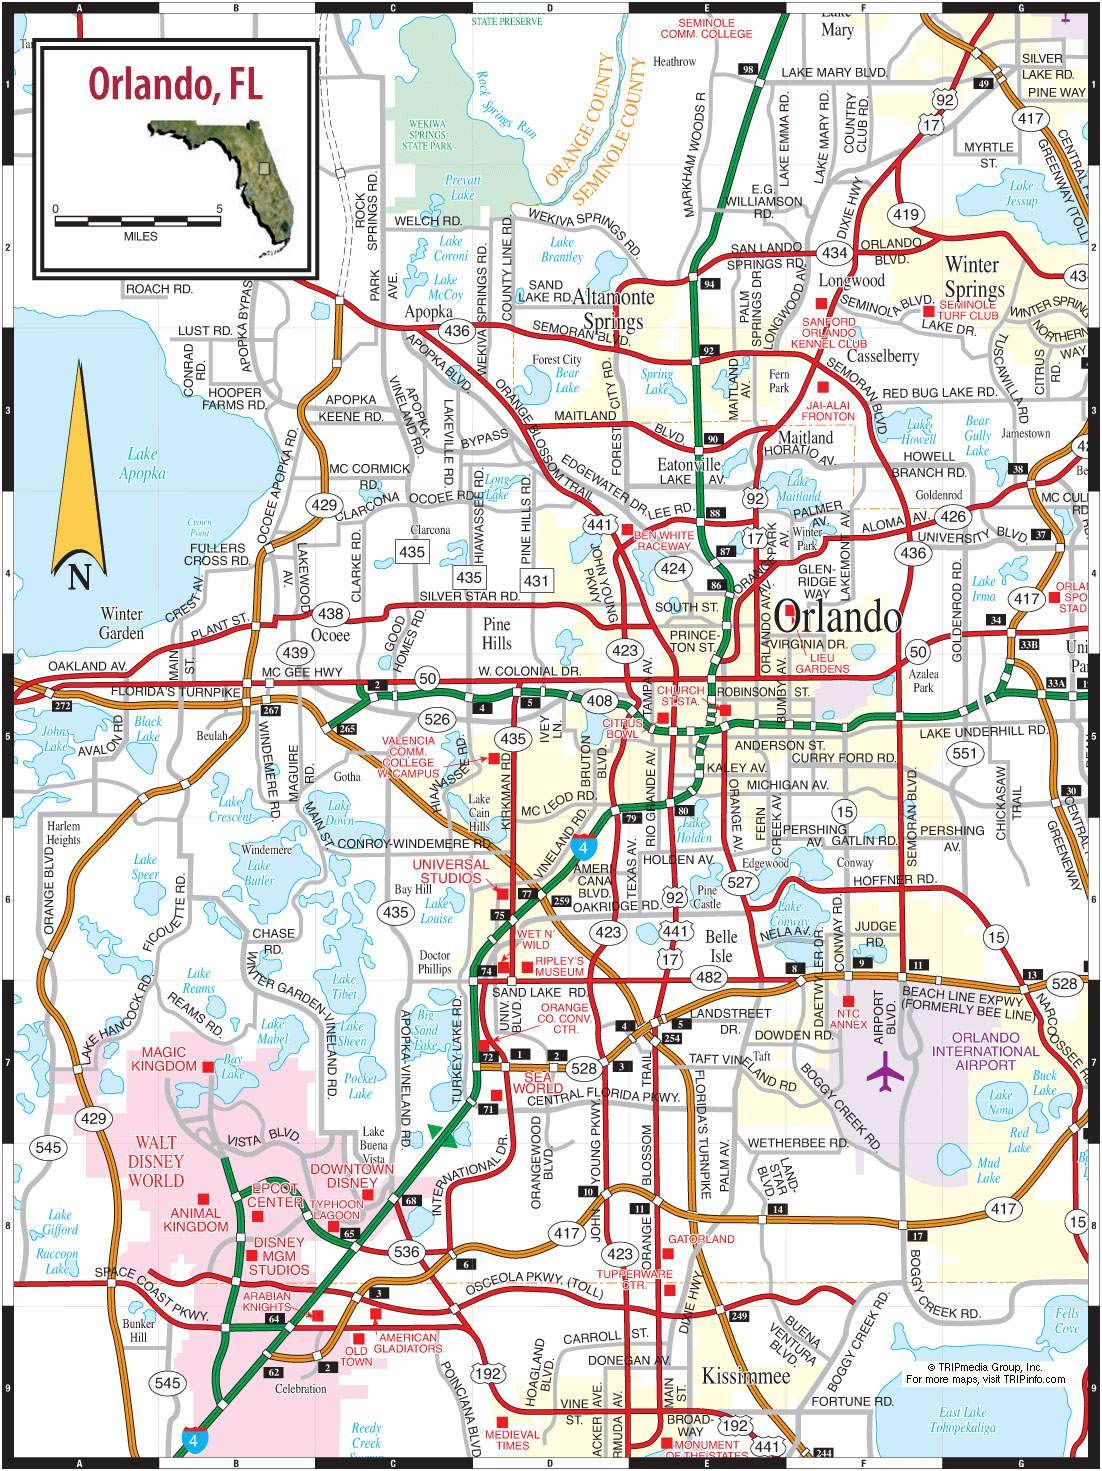 Large Orlando Maps For Free Download And Print | High-Resolution And - Orlando Florida Location On Map